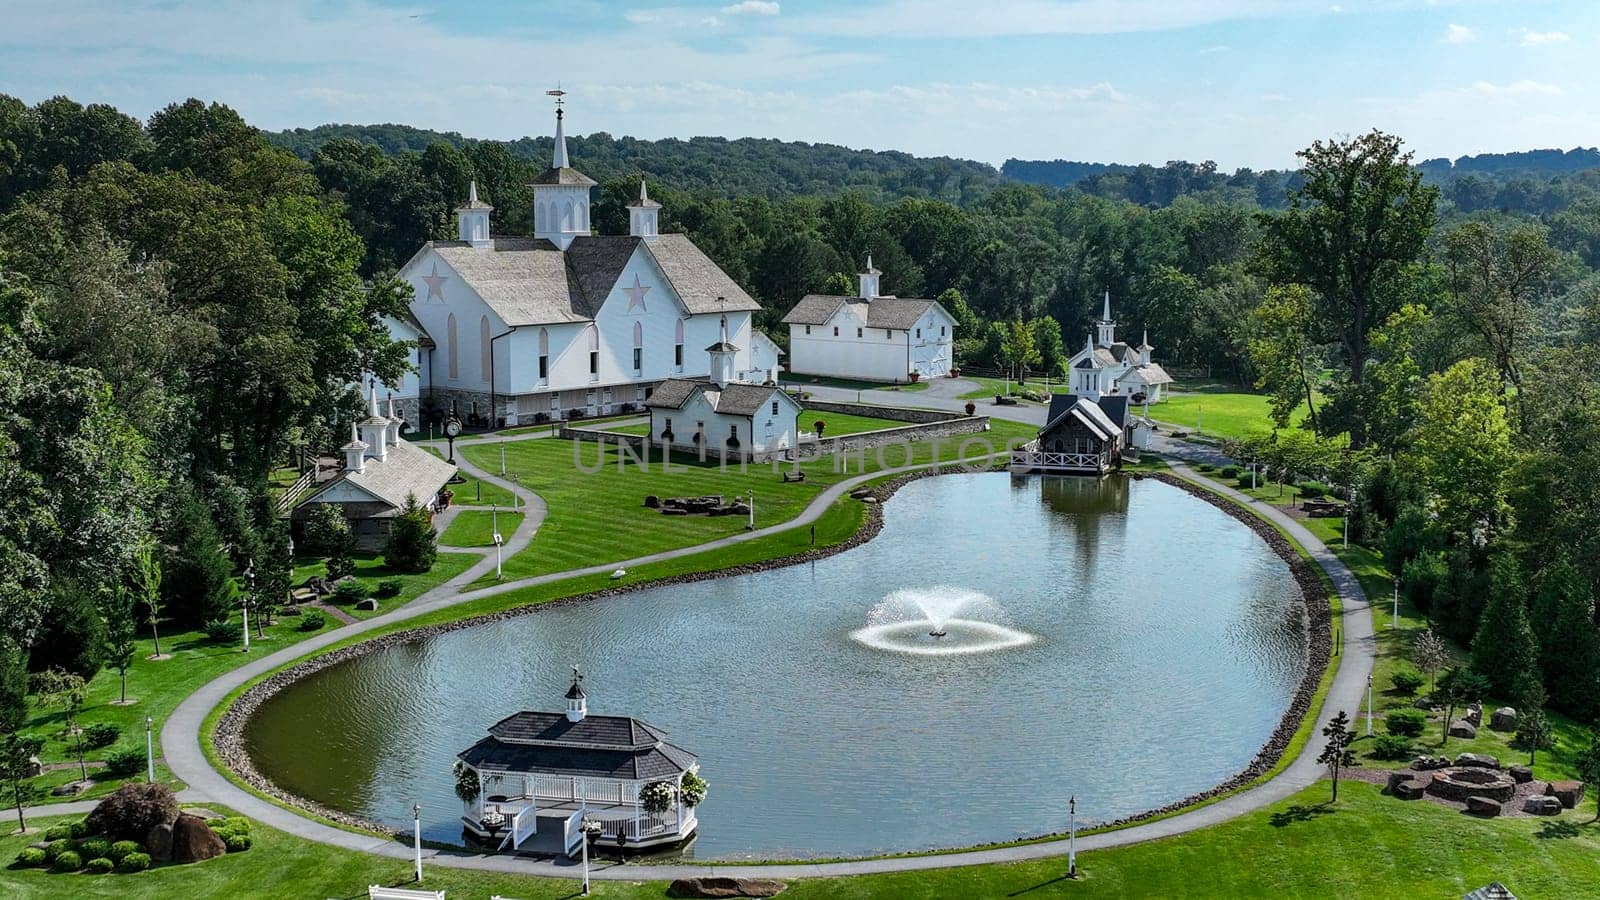 Aerial View Showcasing A Cluster Of Traditional White Orthodox Churches With Cross-Topped Domes, Arranged Around A Curved Pond With A Fountain, Amidst Green Trees And Neatly Arranged White Benches